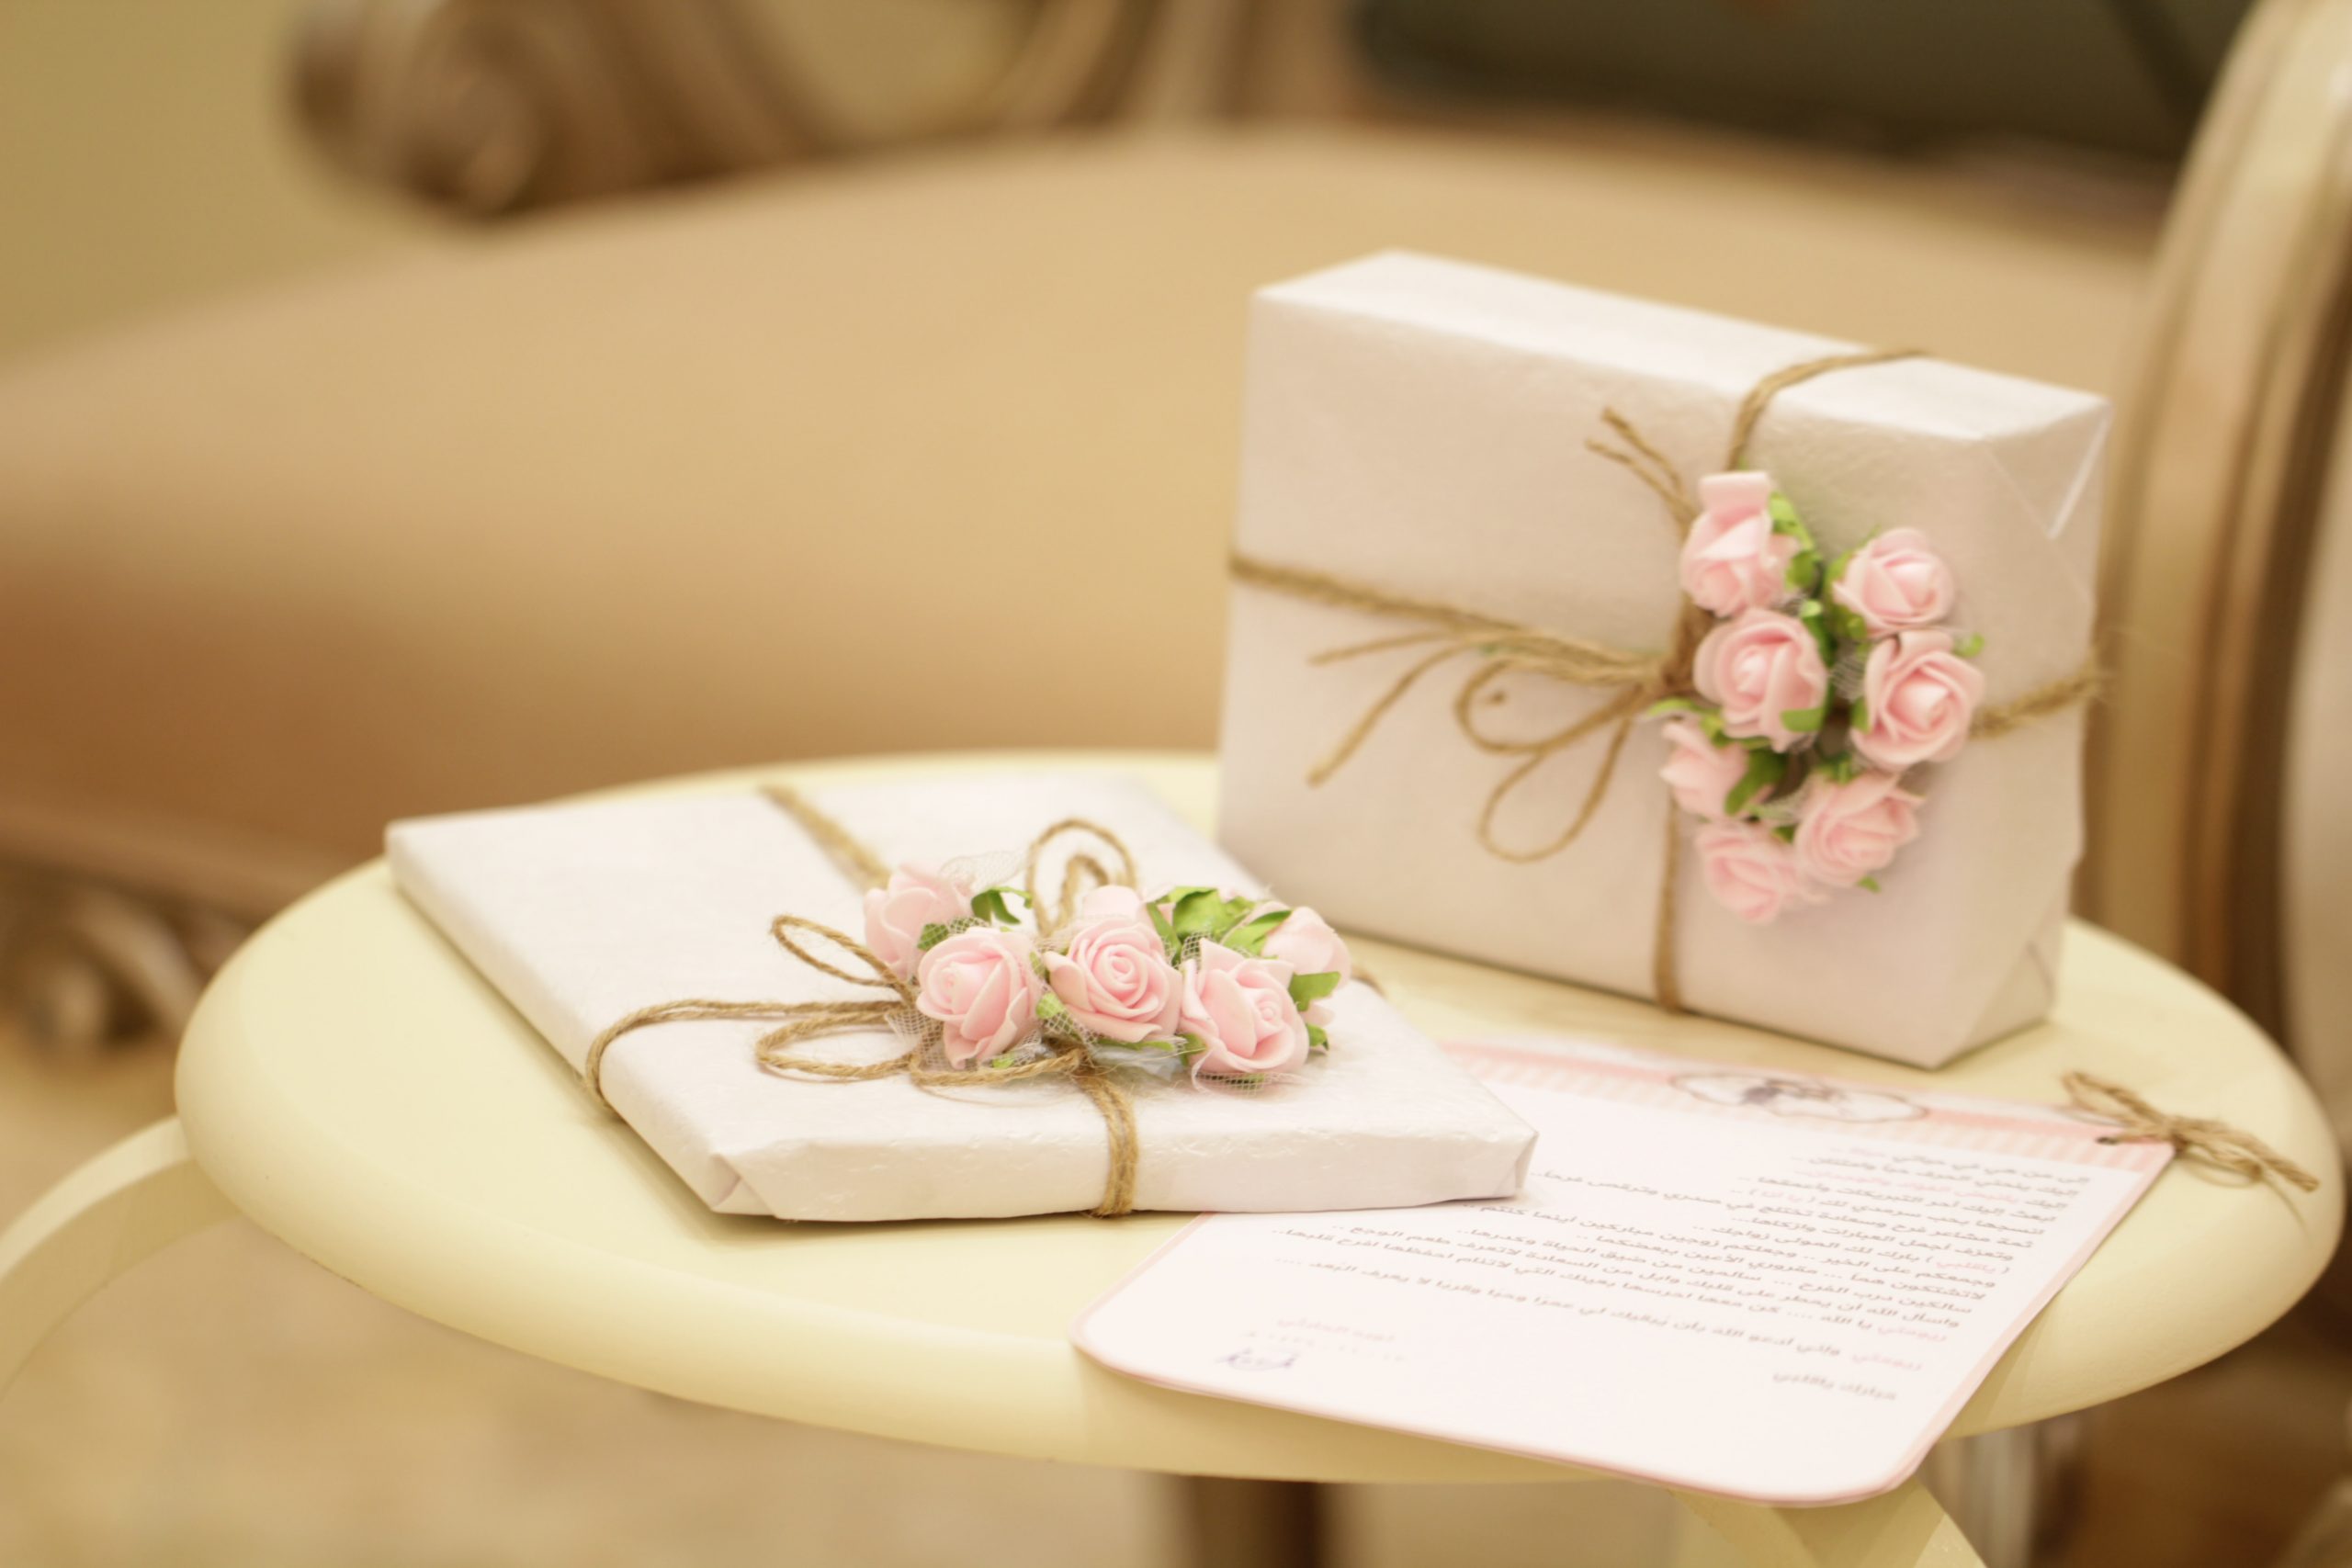 two wrapped wedding gifts, wedding gift ideas at different price points